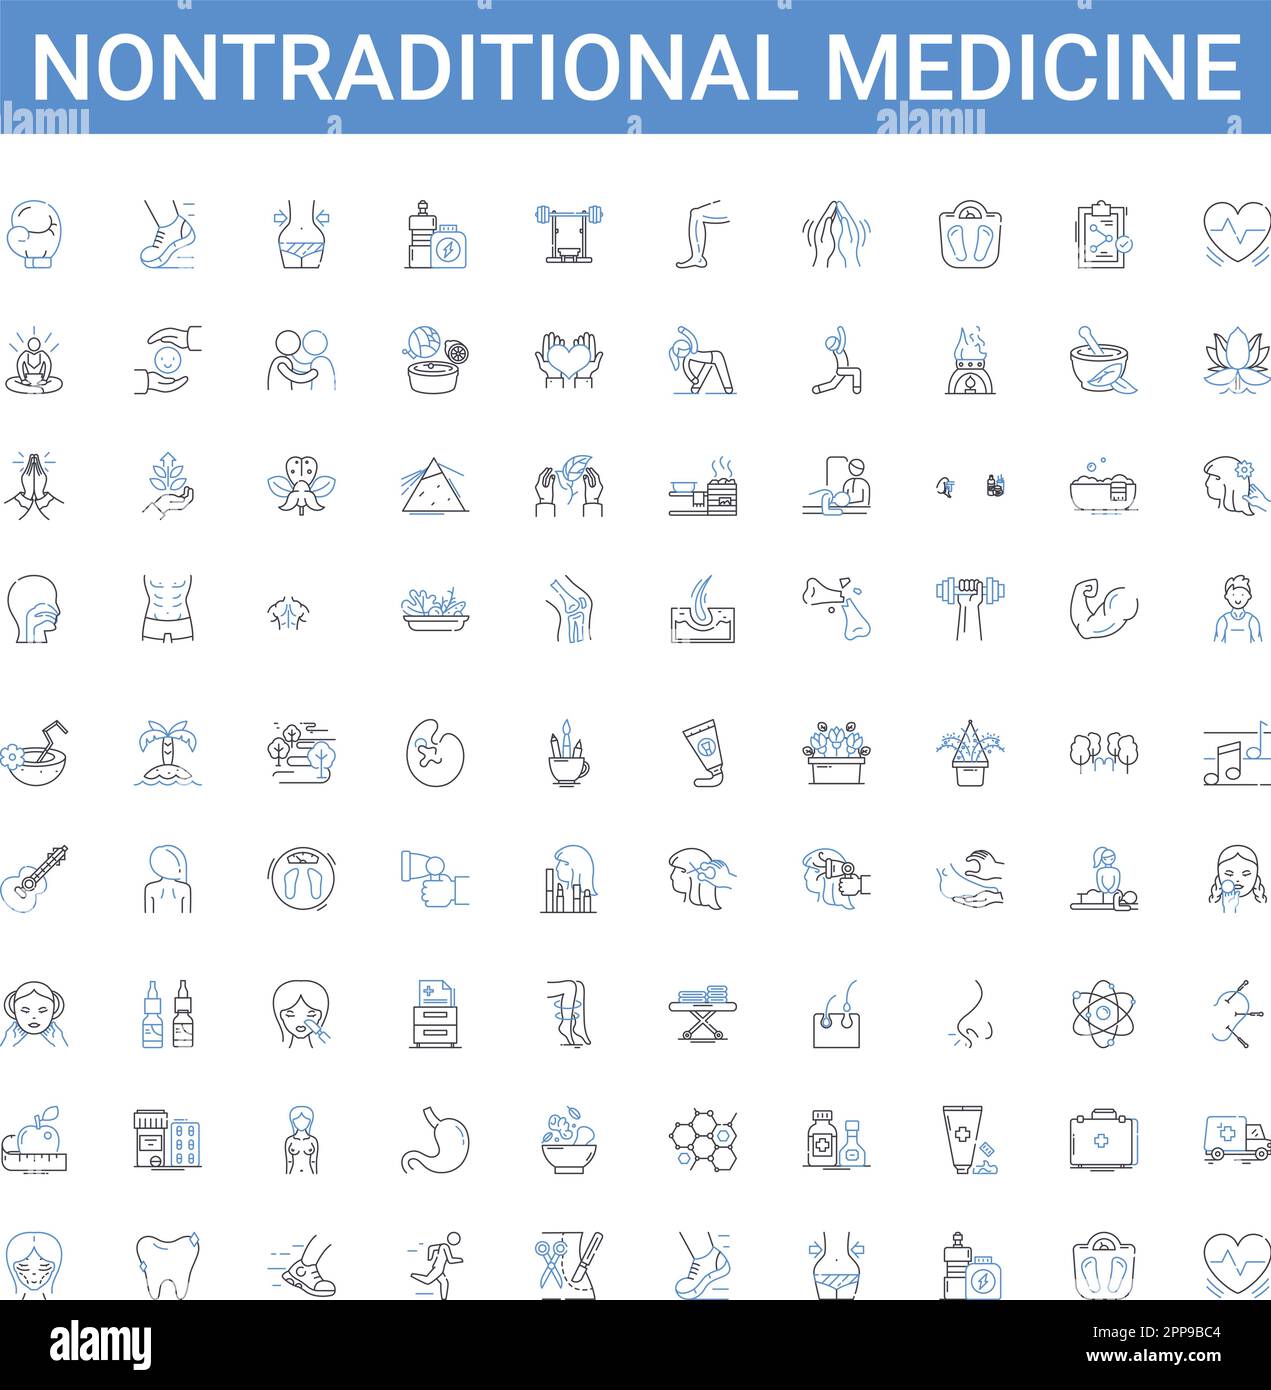 Nontraditional medicine outline icons collection. Alternative, Complementary, Holistic, Herbal, Homeopathic, Ayurvedic, Unconventional vector Stock Vector